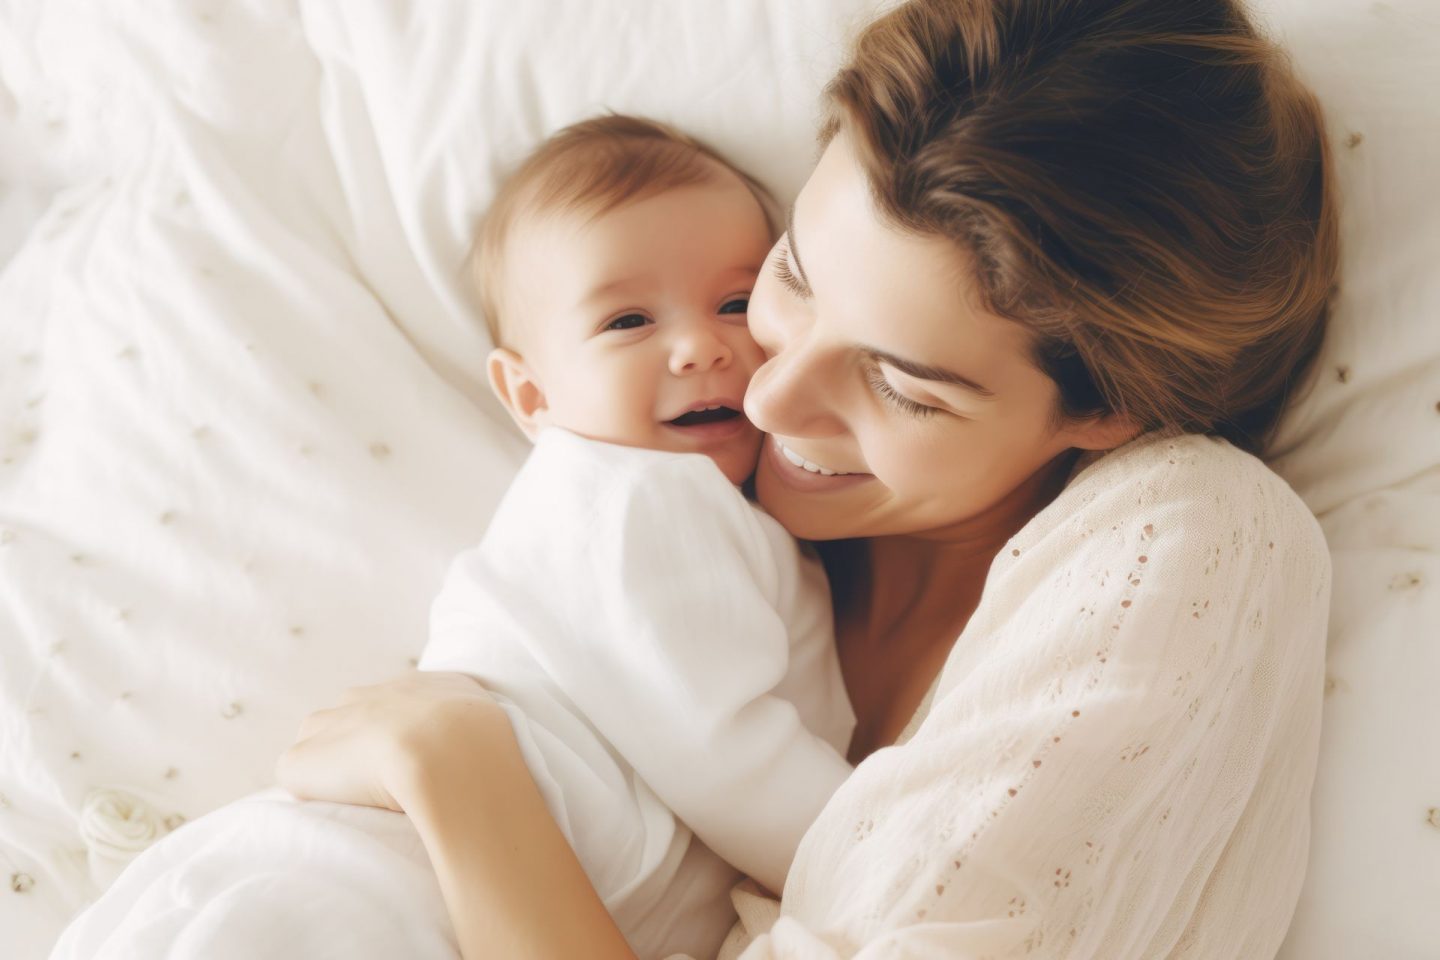 Benefits & Guide to Baby Massage